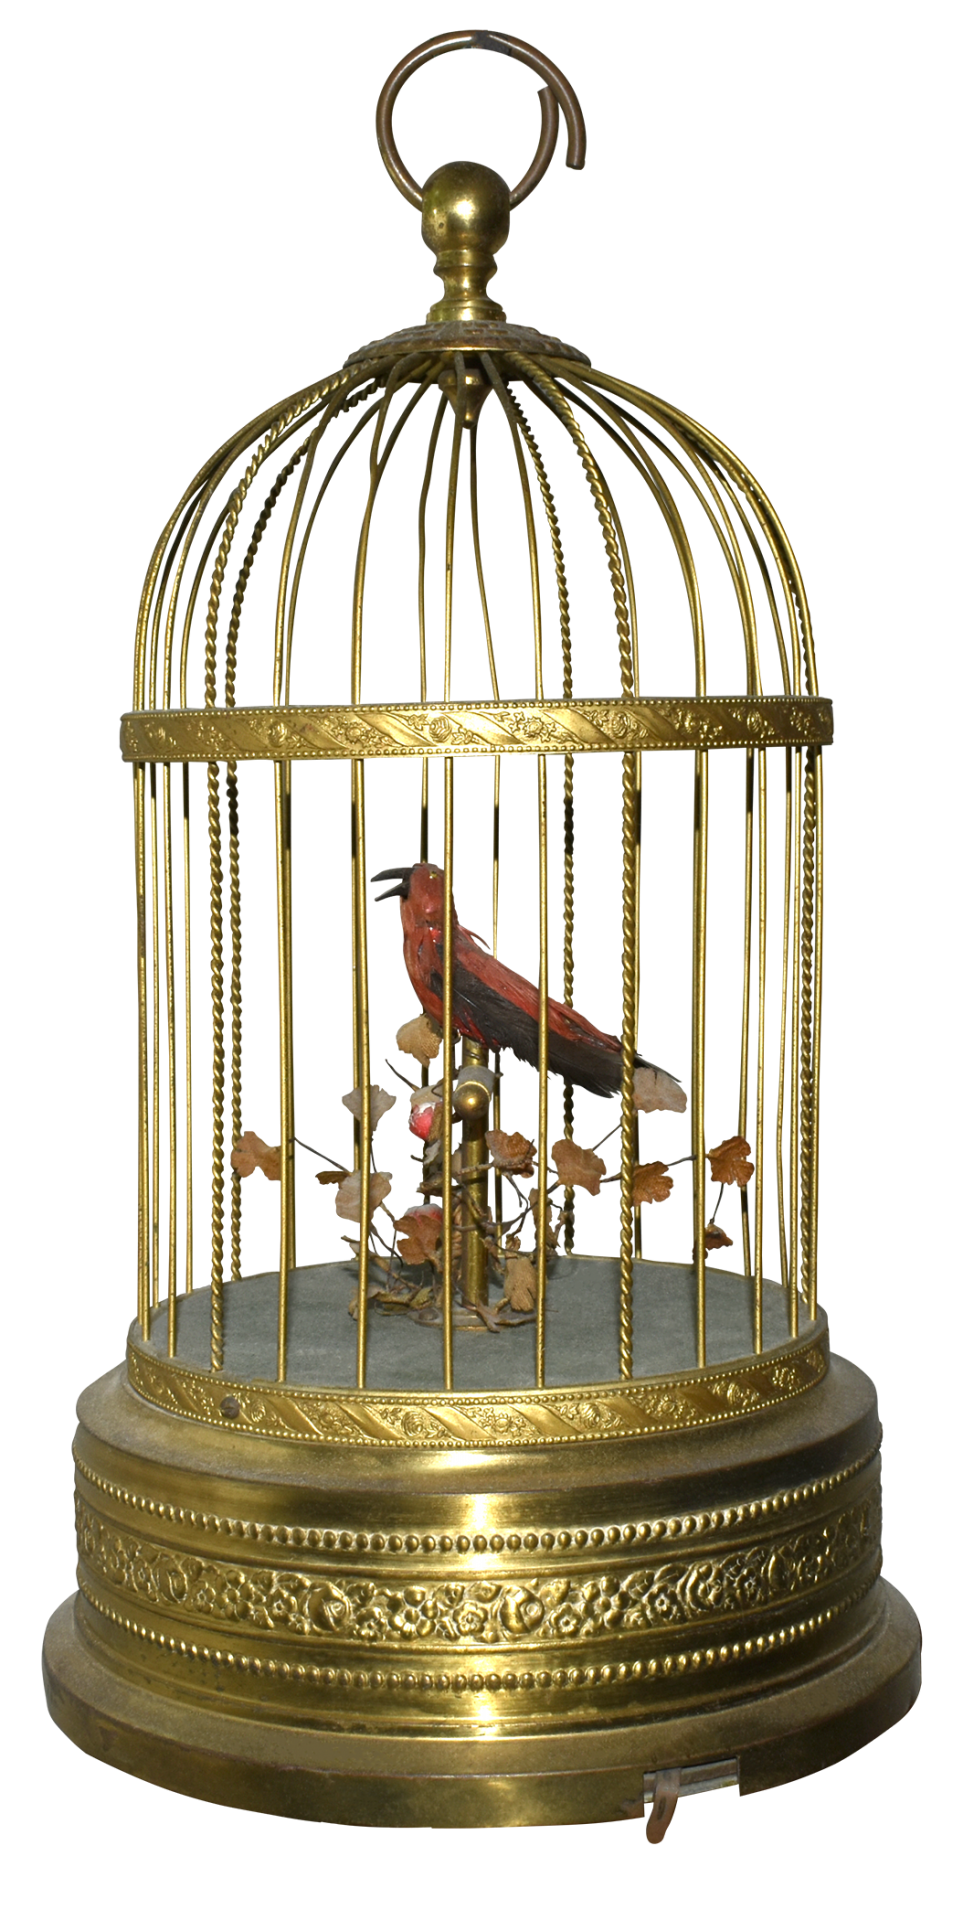 cage birds play characters